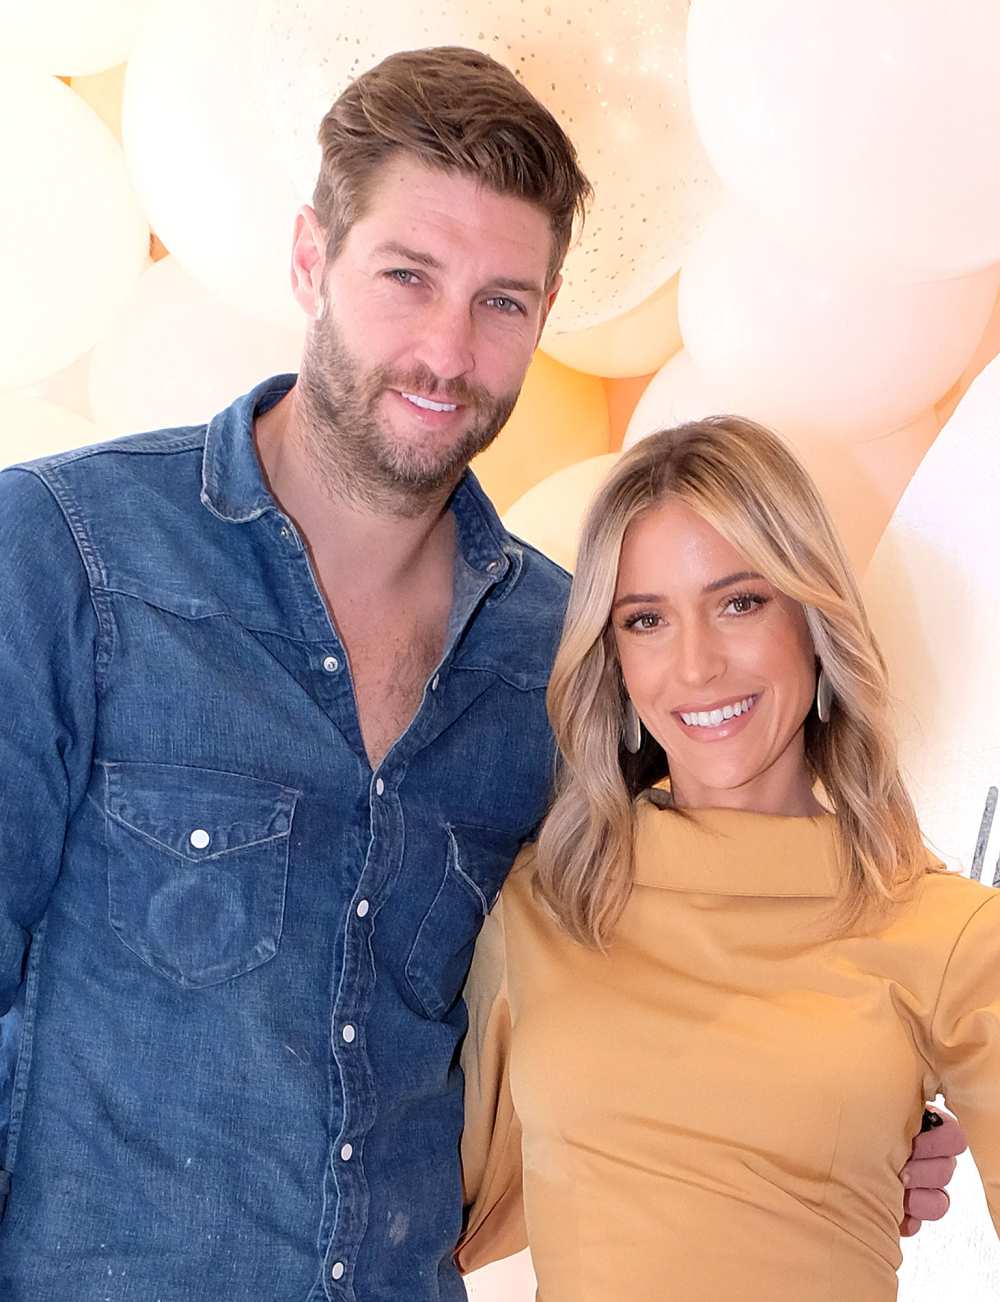 Kristin Cavallari Last Name Has Been Restored Waiting for Jay Cutler Divorce to Be Finalized